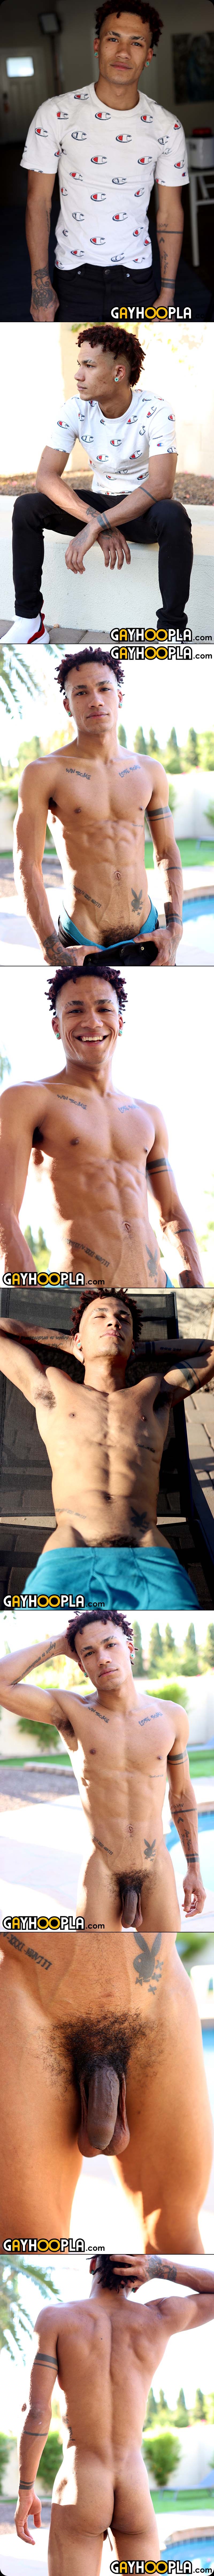 Martavis Ray [Shows Off His Moves On The Luckiest Couch Ever] at GayHoopla